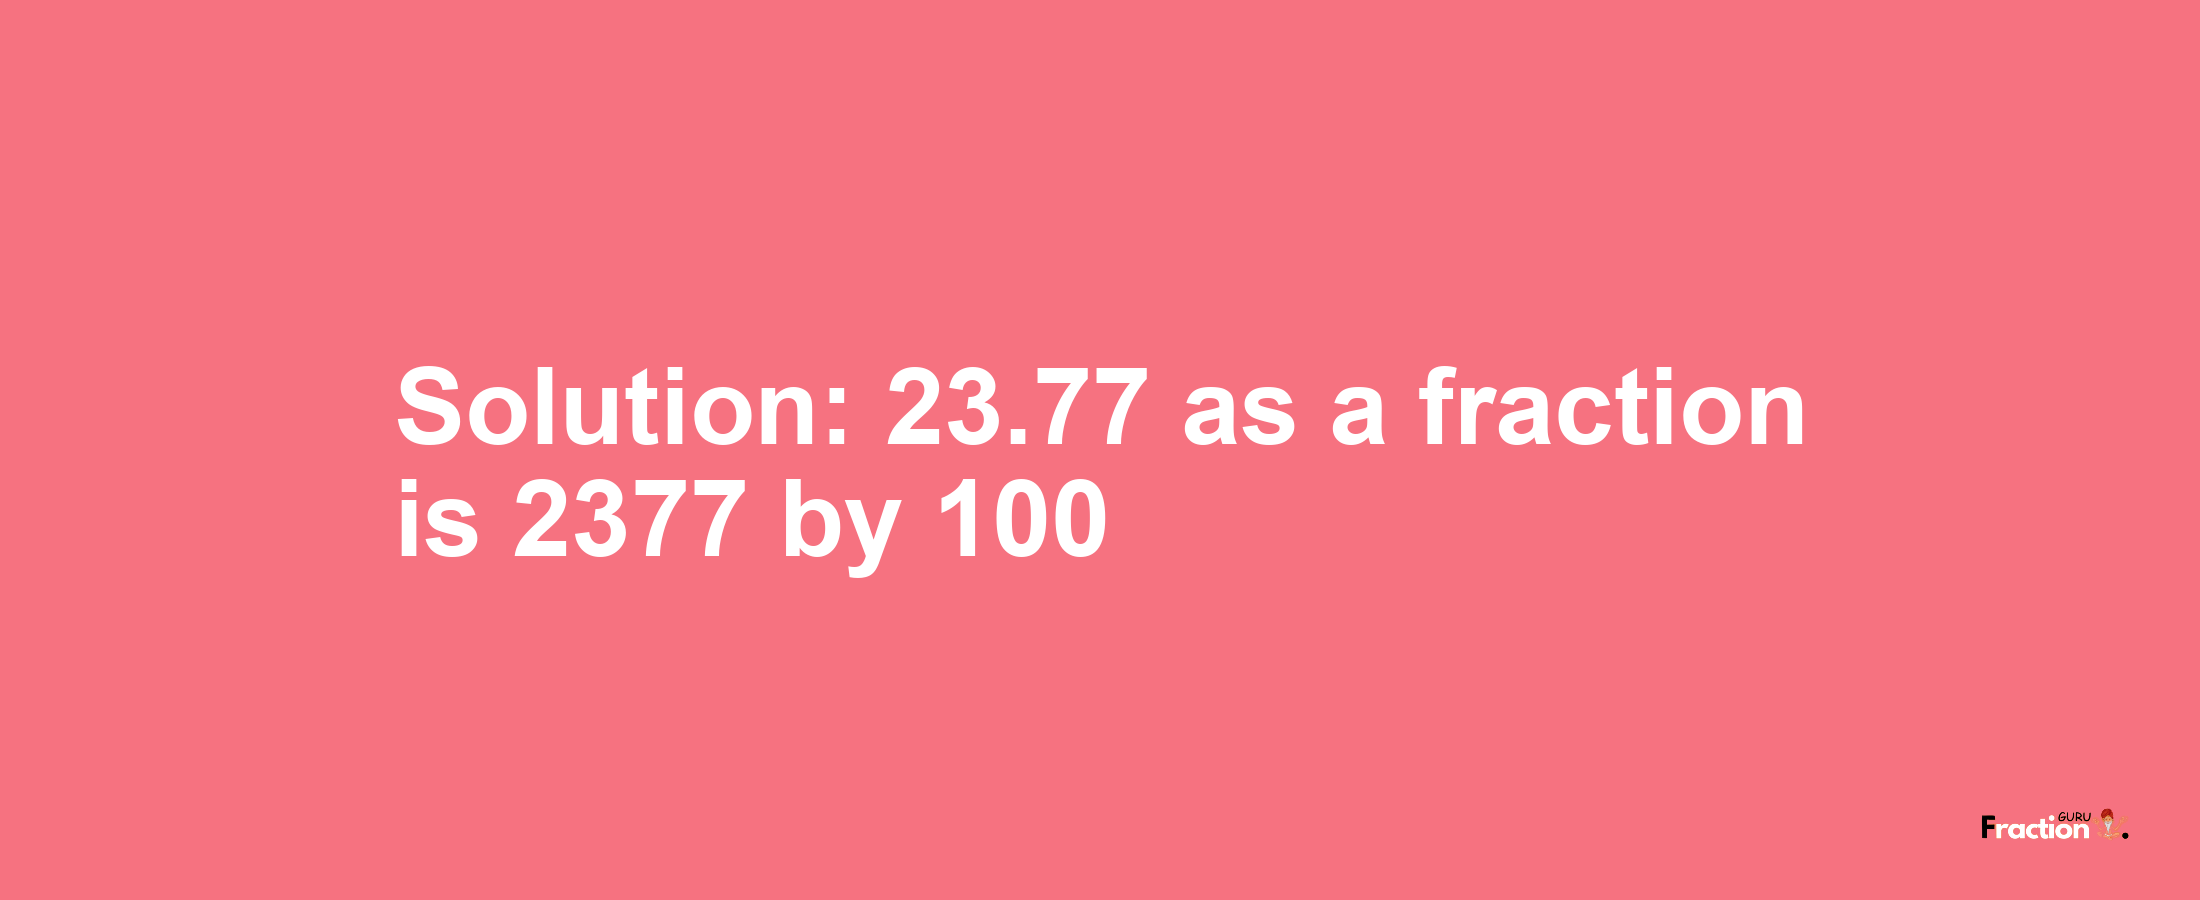 Solution:23.77 as a fraction is 2377/100